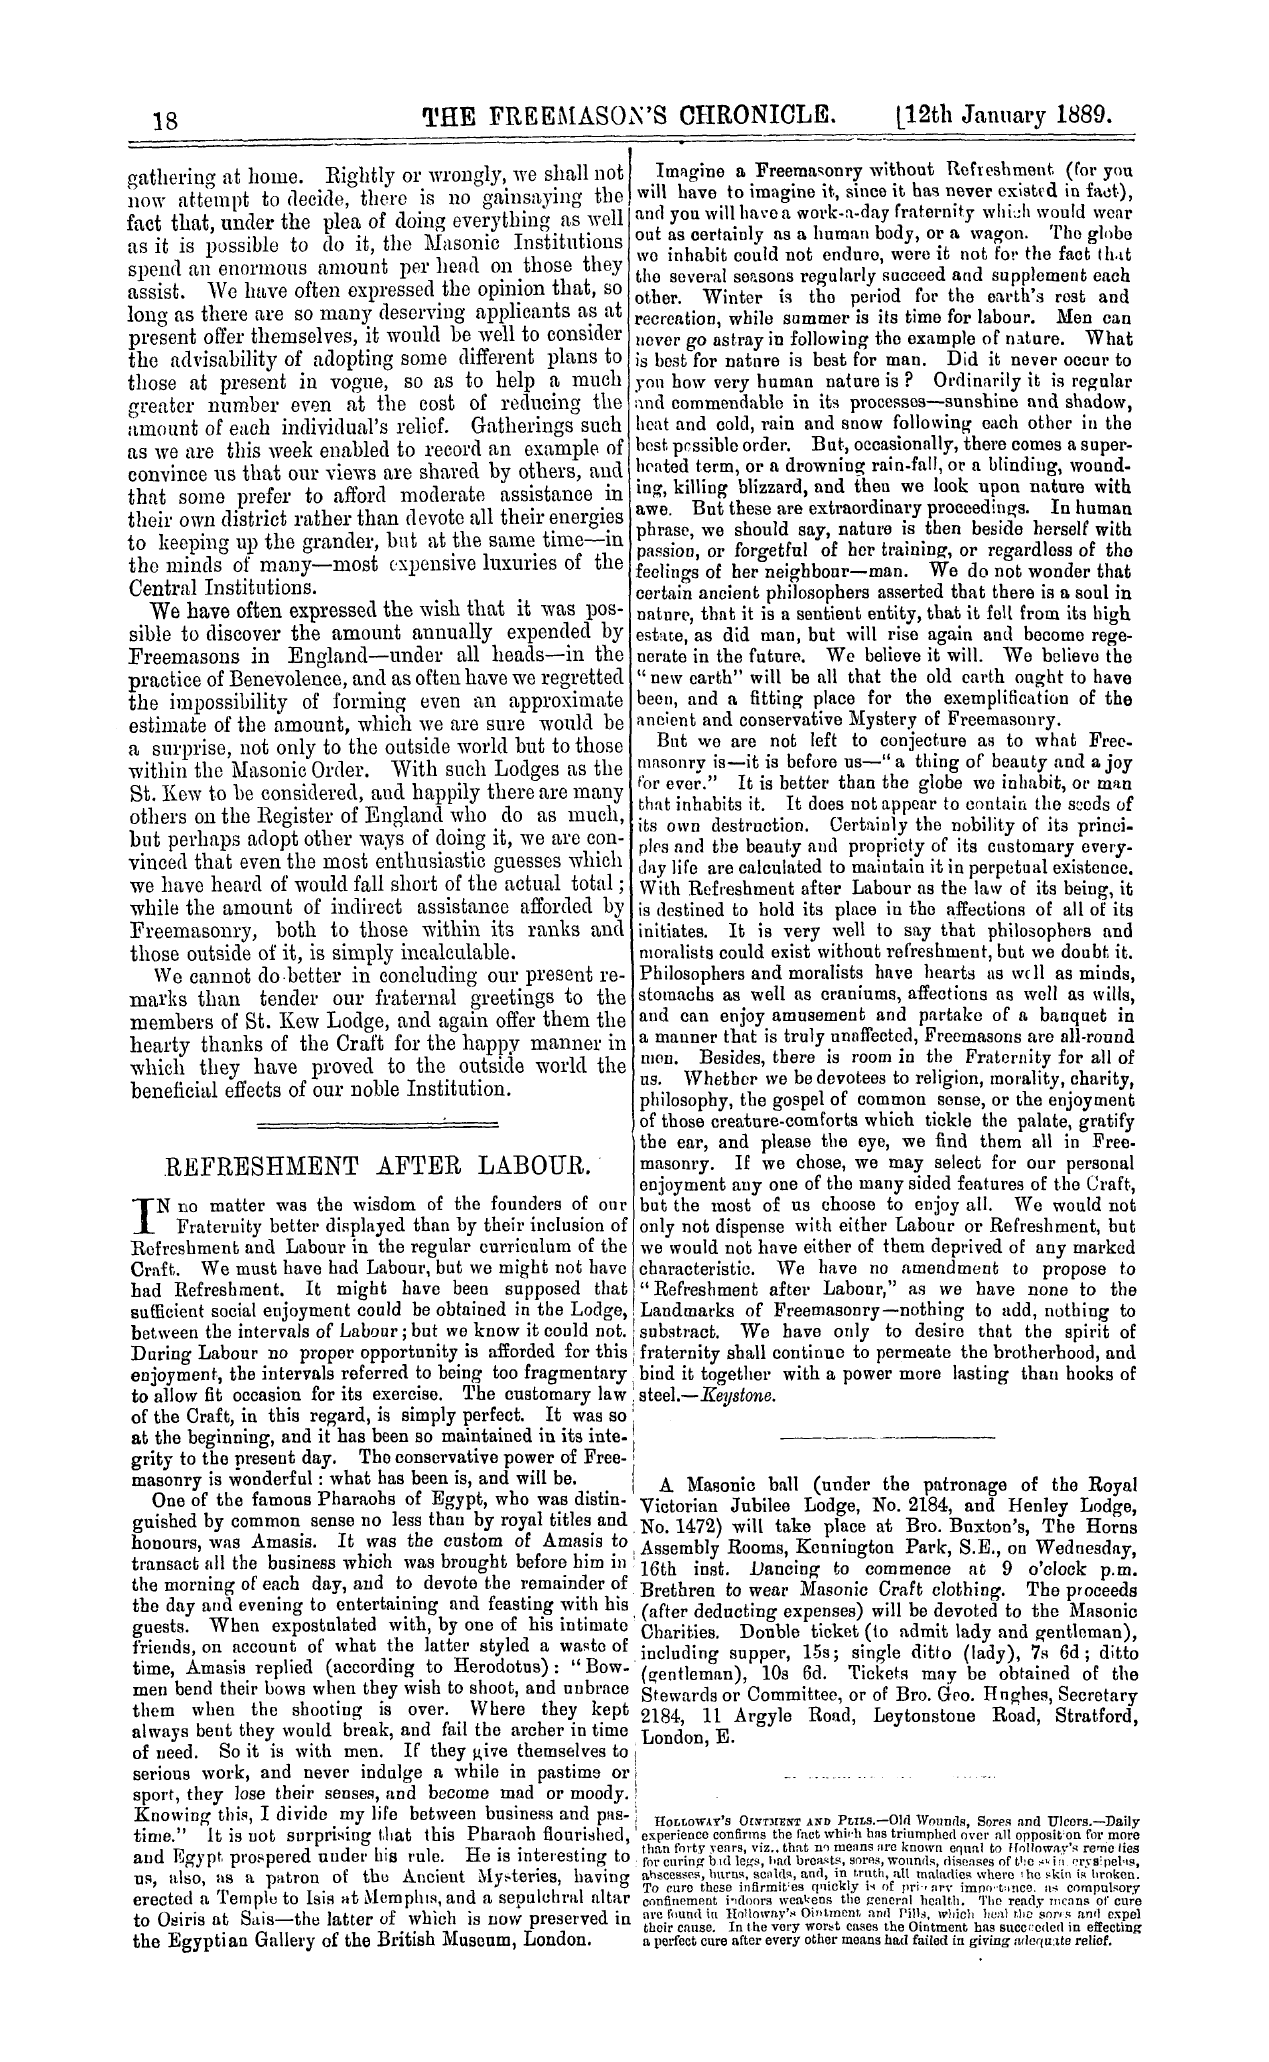 The Freemason's Chronicle: 1889-01-12 - Refreshment After Labour.